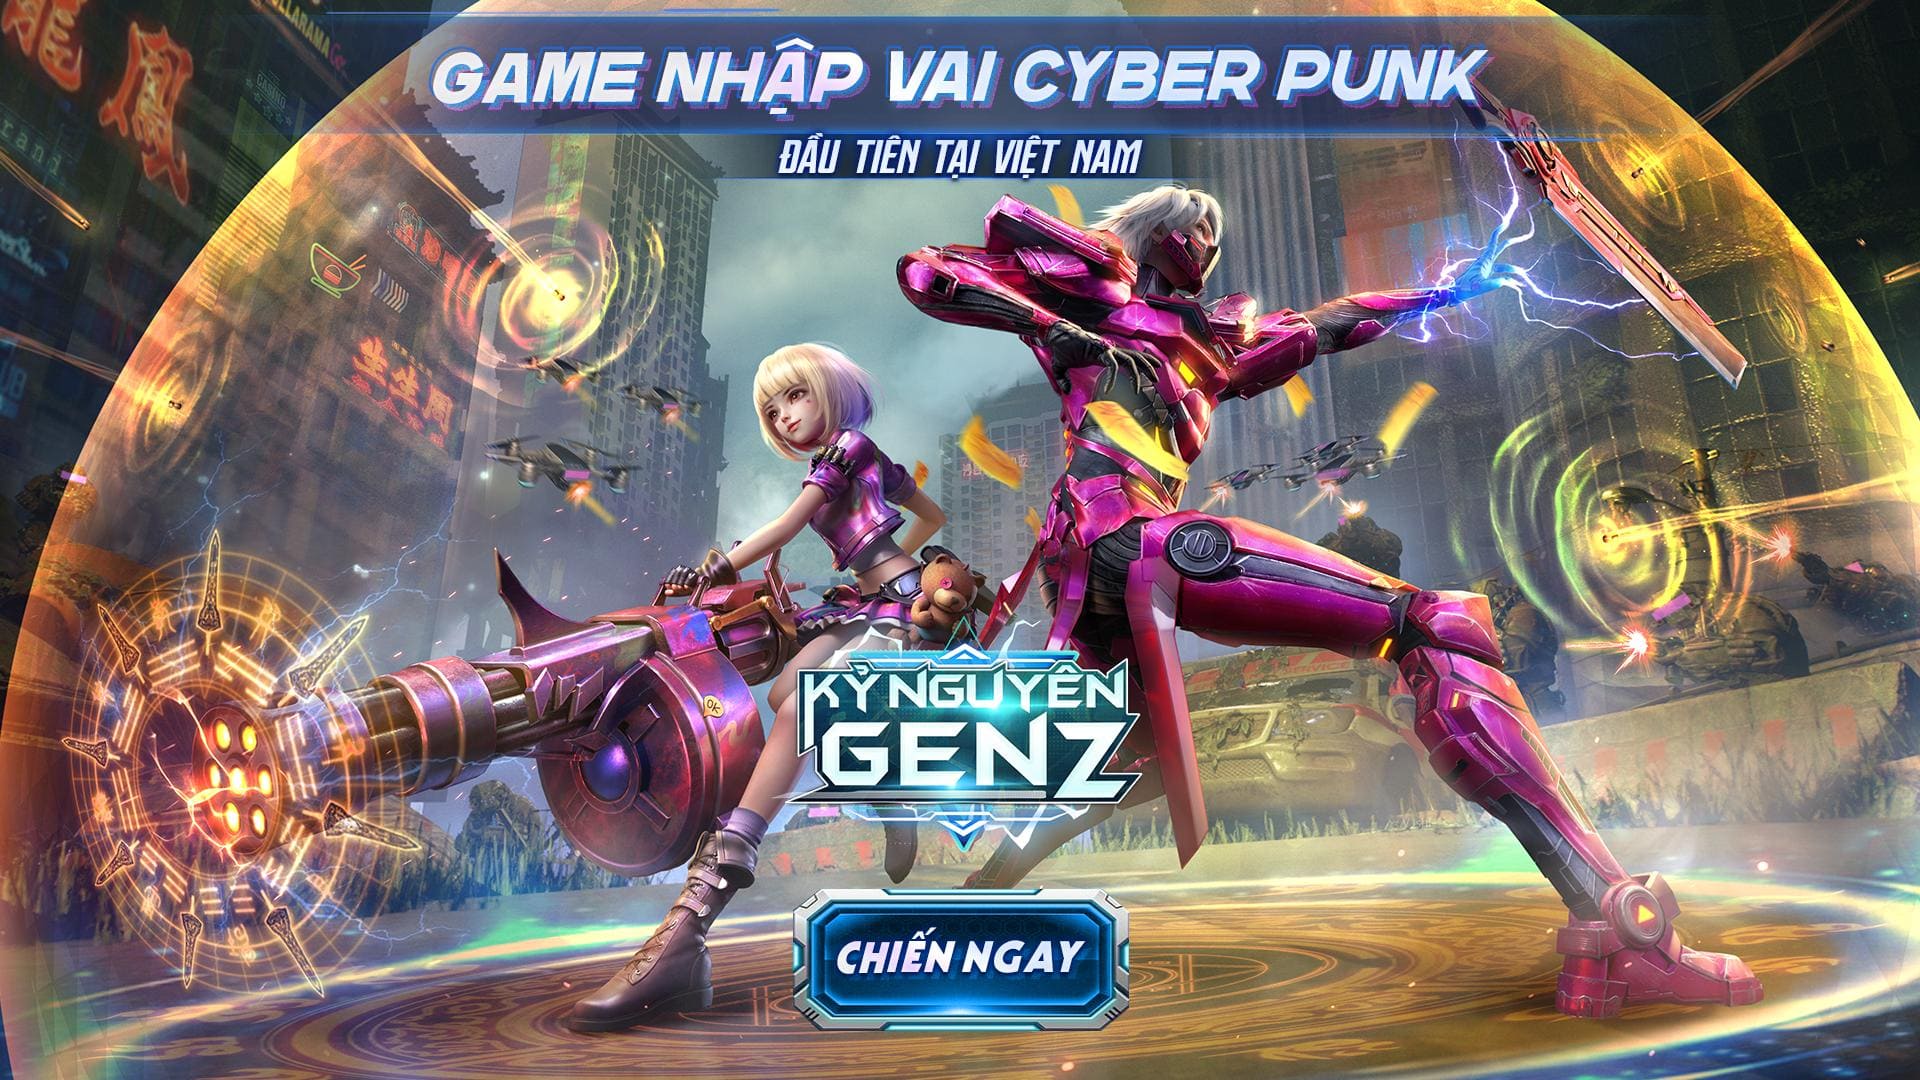 Sparkling skills, colorful armor, and doomed city scenes are all featured in the image ad below. The depth-of-field setting and color palette make the characters and scenes, which are captured from an ongoing battle, stand out even more and immediately grab players' attention.